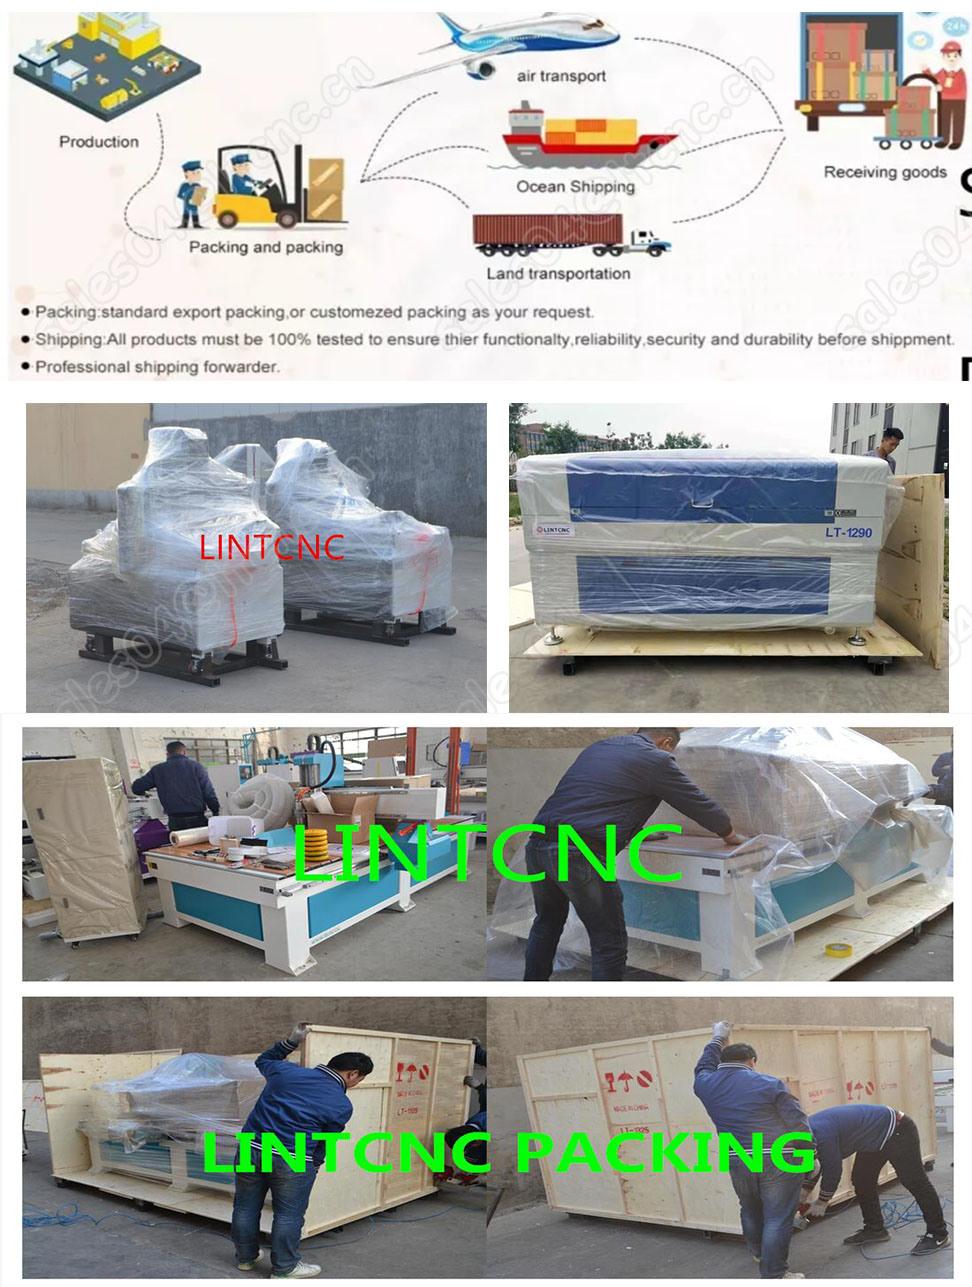 6090 1212 9015 CNC Router with Waterjet Cutting Cooling System Atc CNC Milling Machines Steels